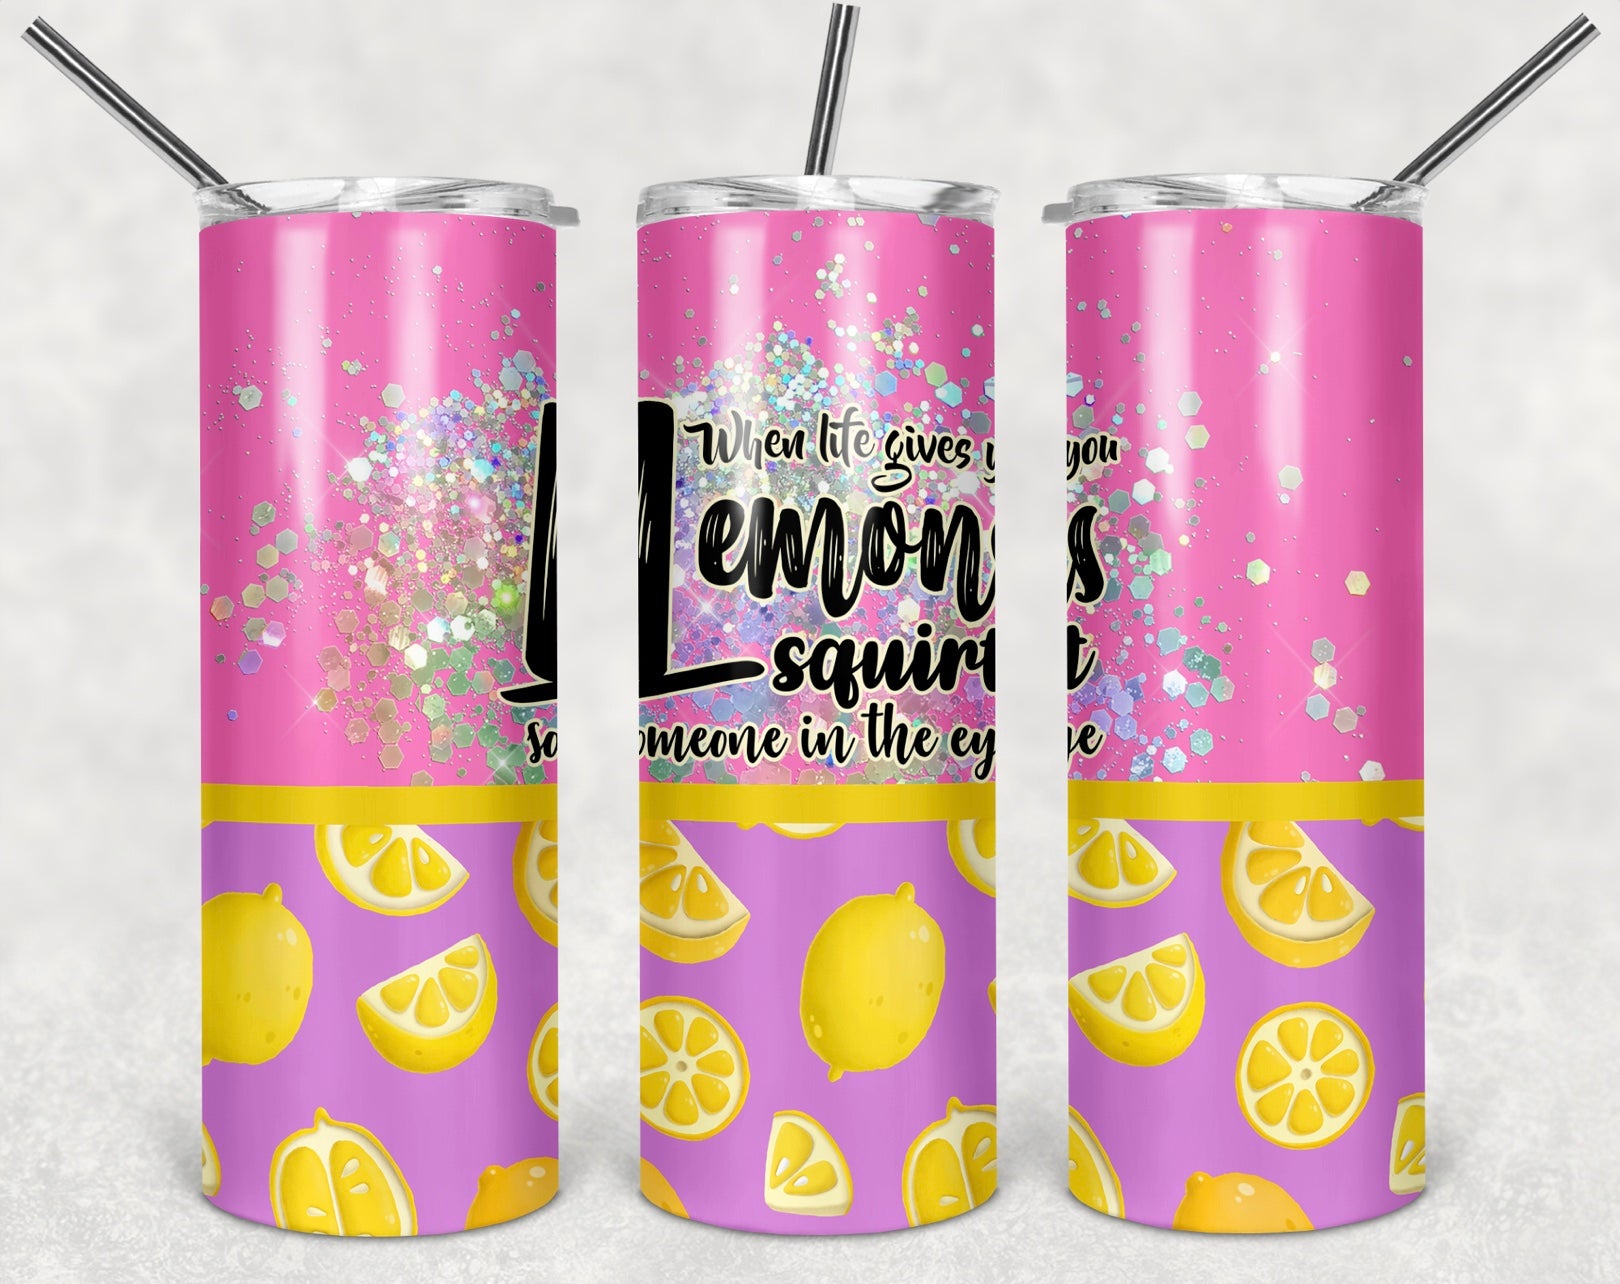 When life gives you lemons, squirt someone in the eye - Tumbler wrap 20oz skinny